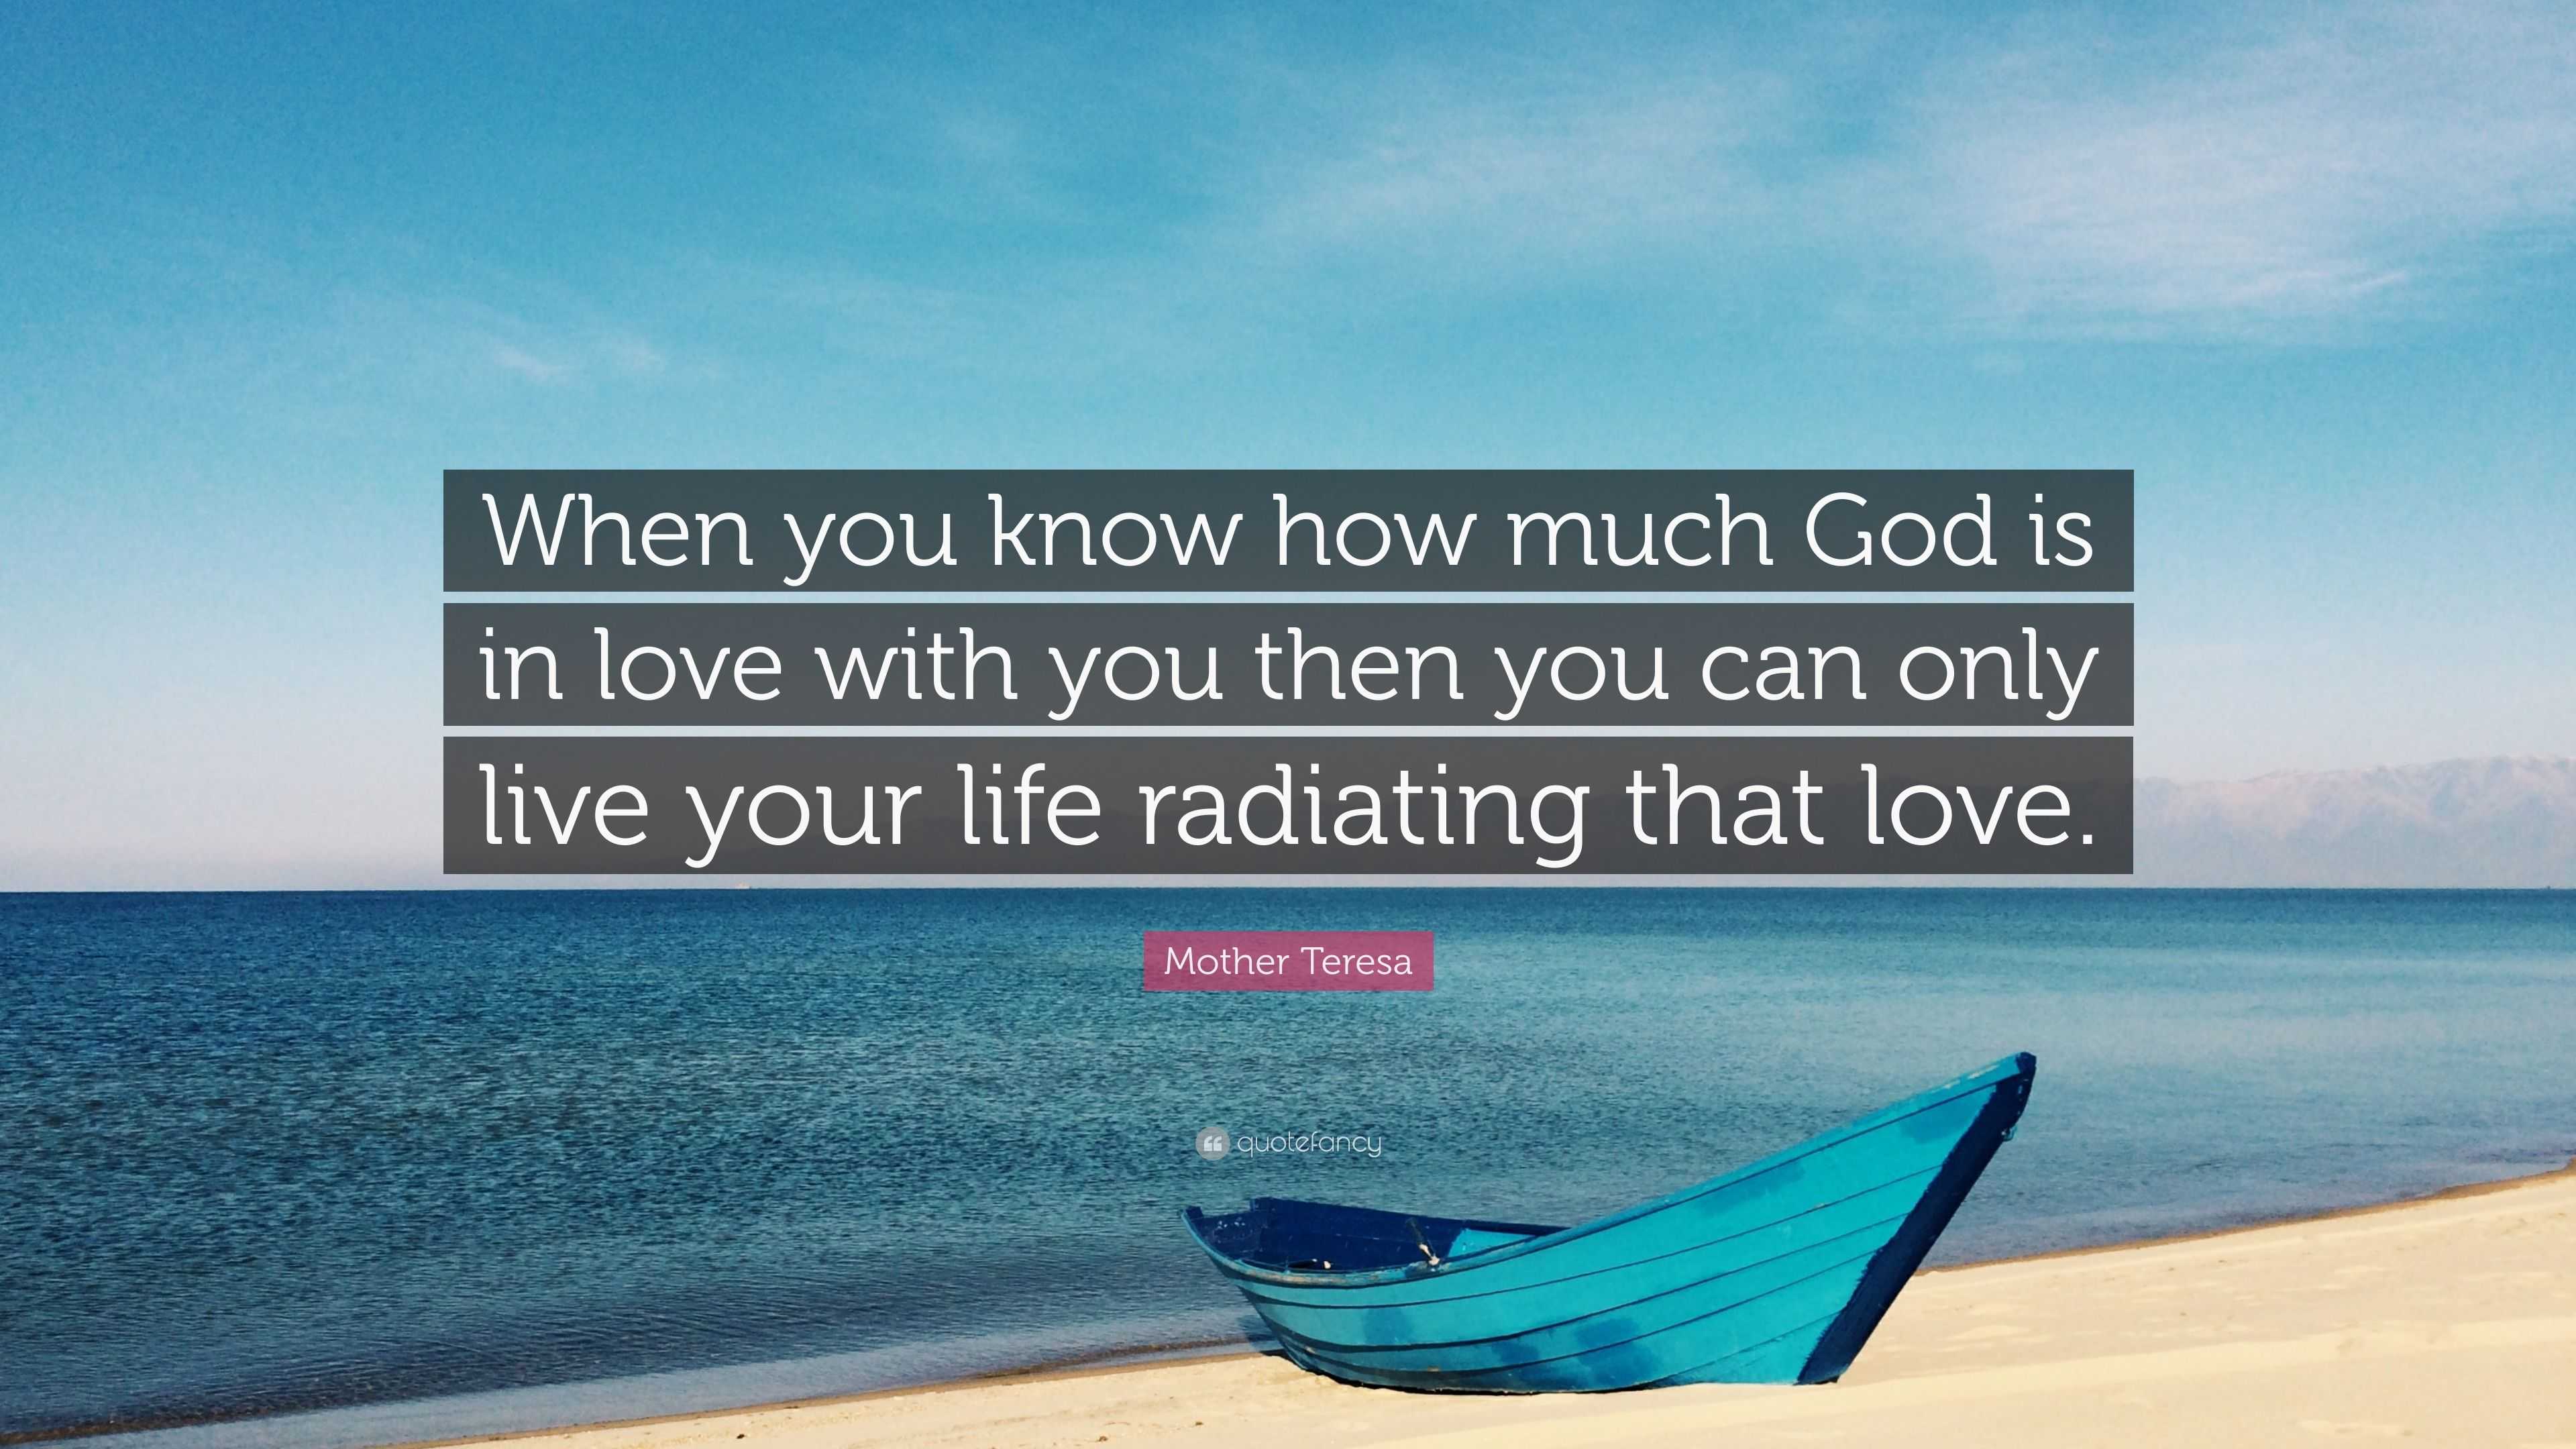 Mother Teresa Quote “When you know how much God is in love with you